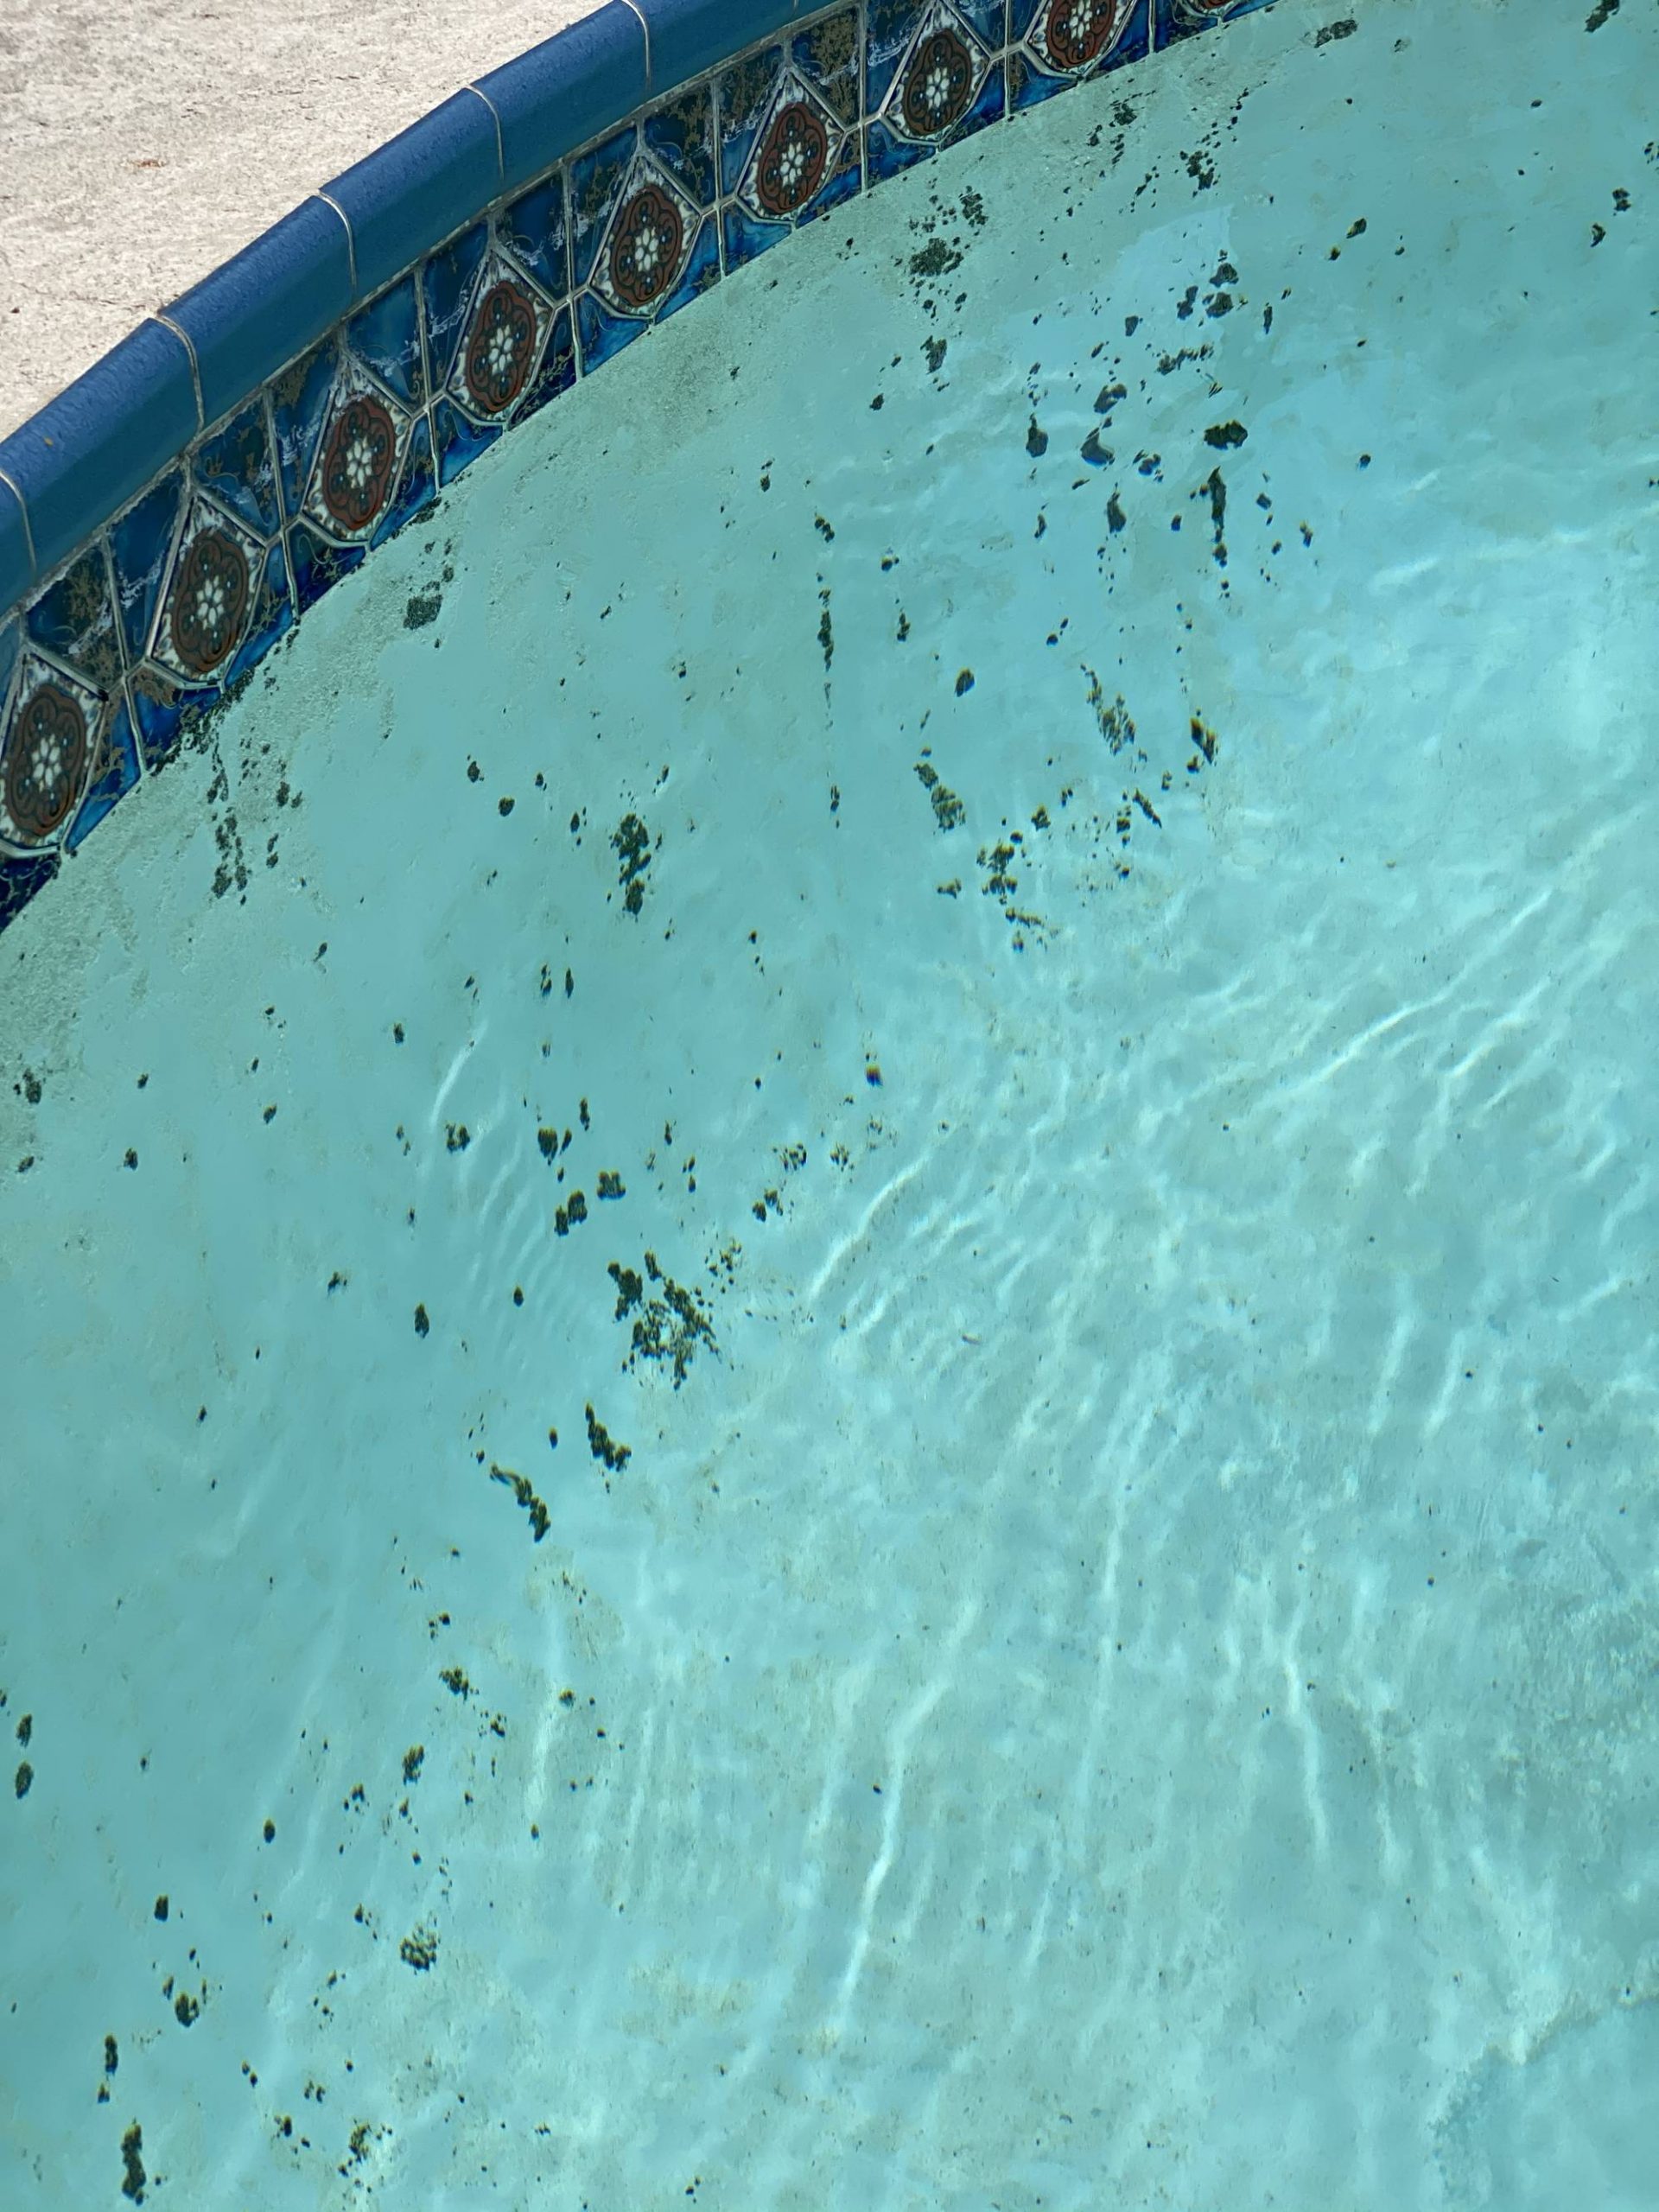 How to get rid of these black spots? : pools